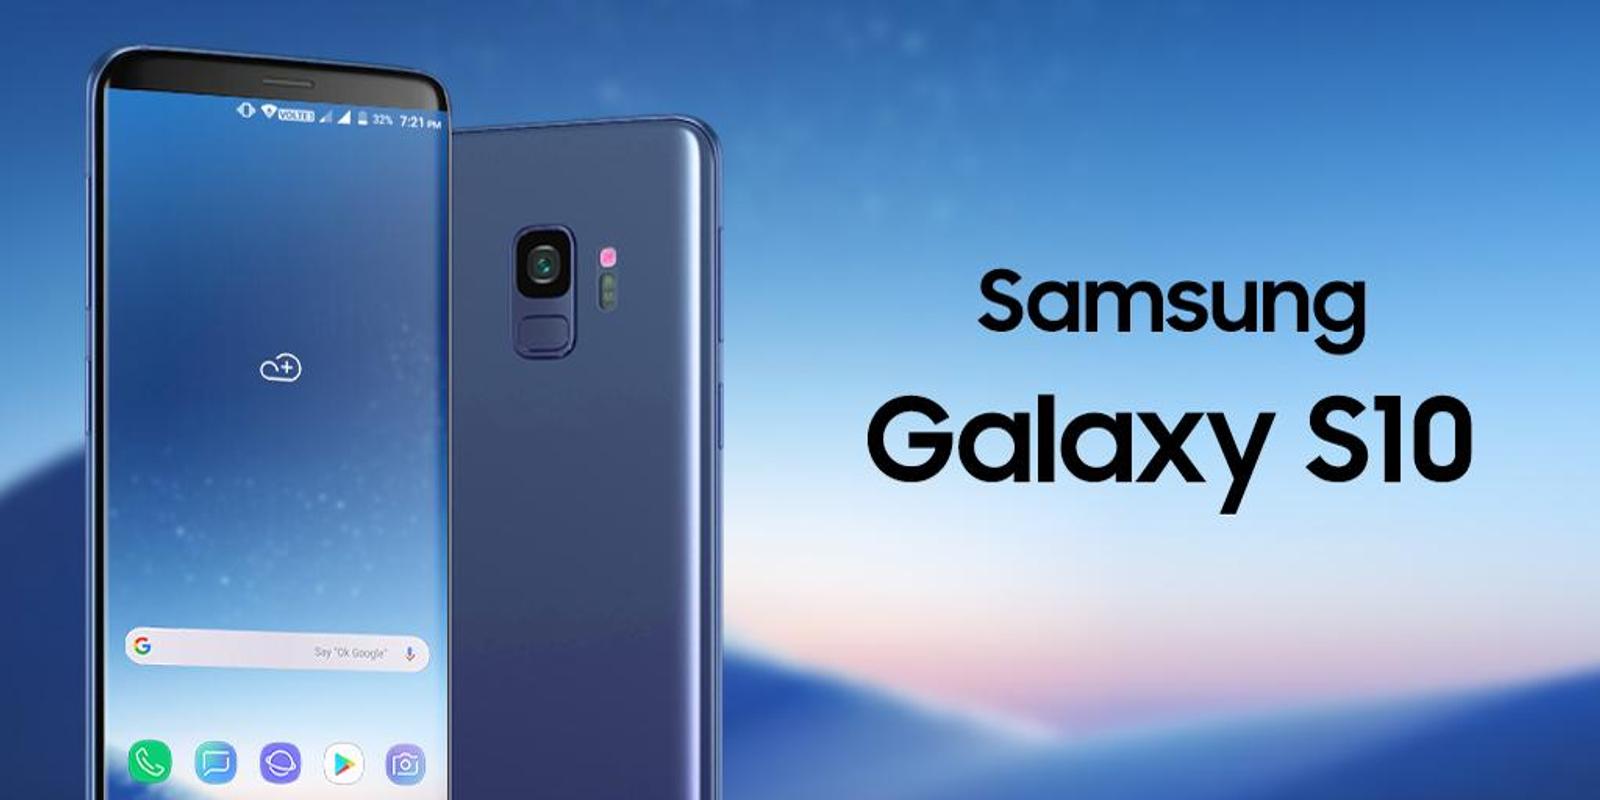 Launcher Theme for Samsung Galaxy S10 for Android - APK ...